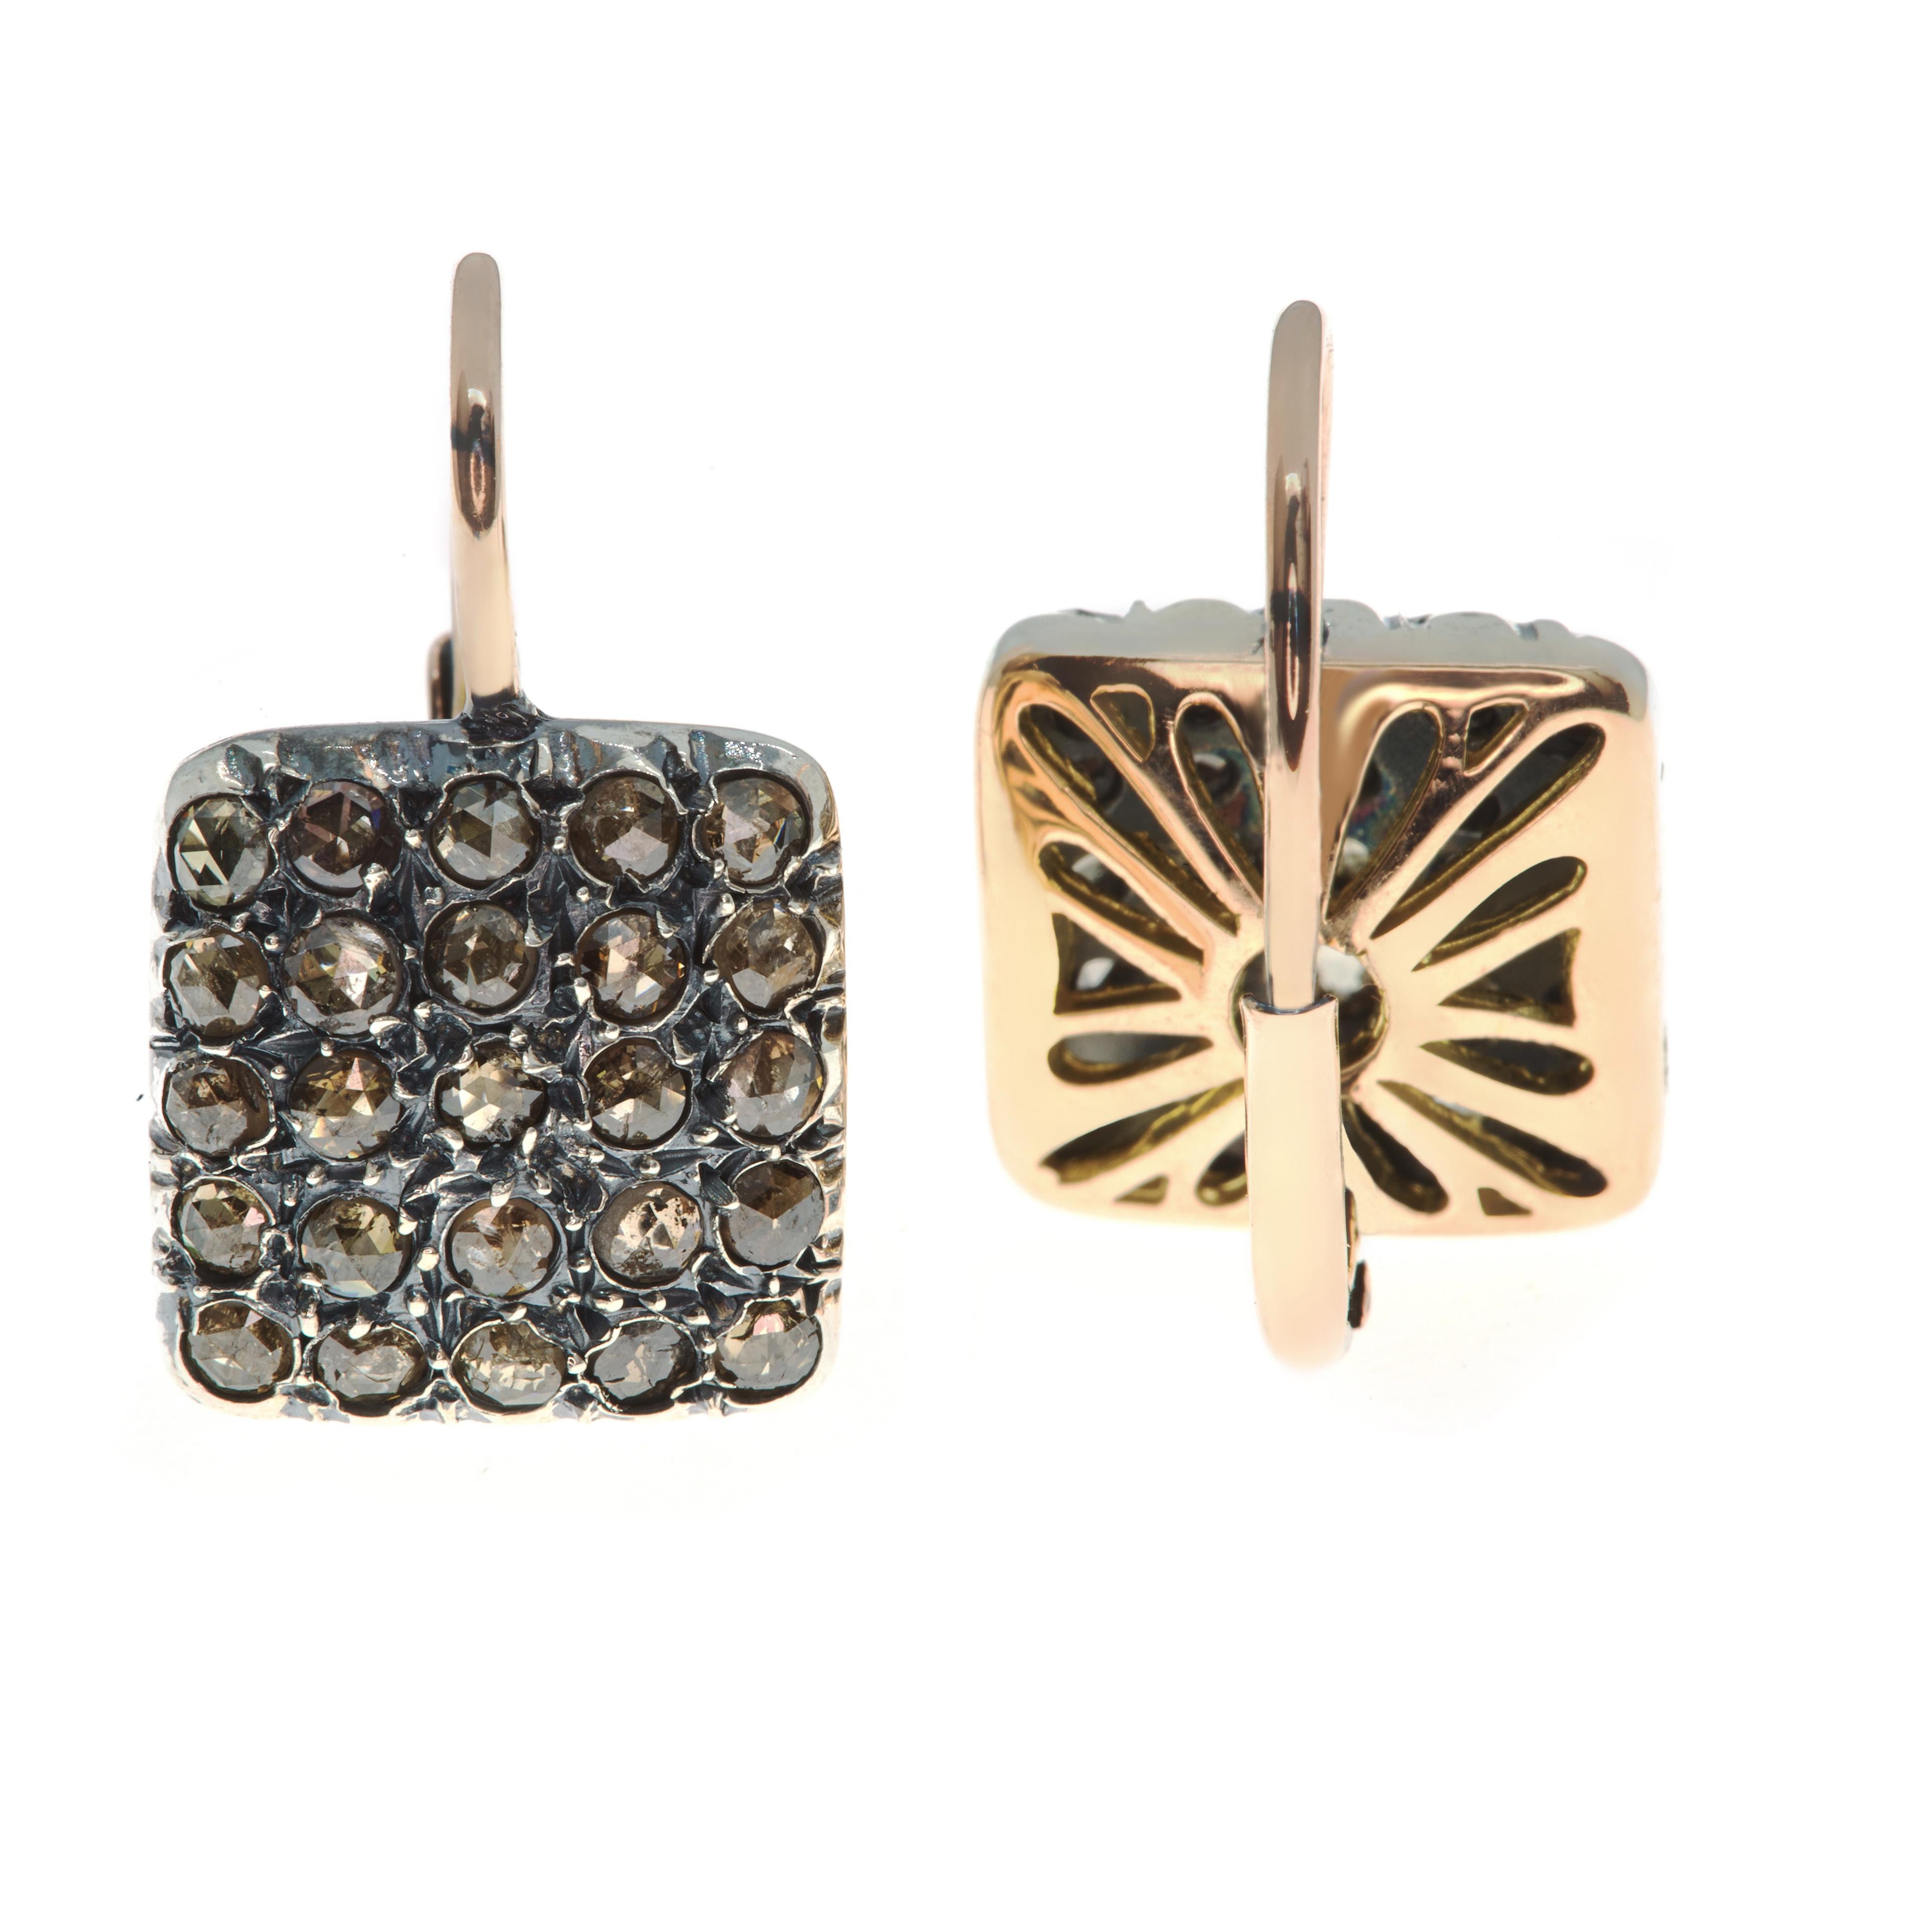 Modern-looking in their simplicity and yet 600-odd years in the making, these 9-karat rose gold and blackened .925 silver earrings are produced using an ancient Albanian technique that was brought to Palermo, Sicily in the fifteenth century.